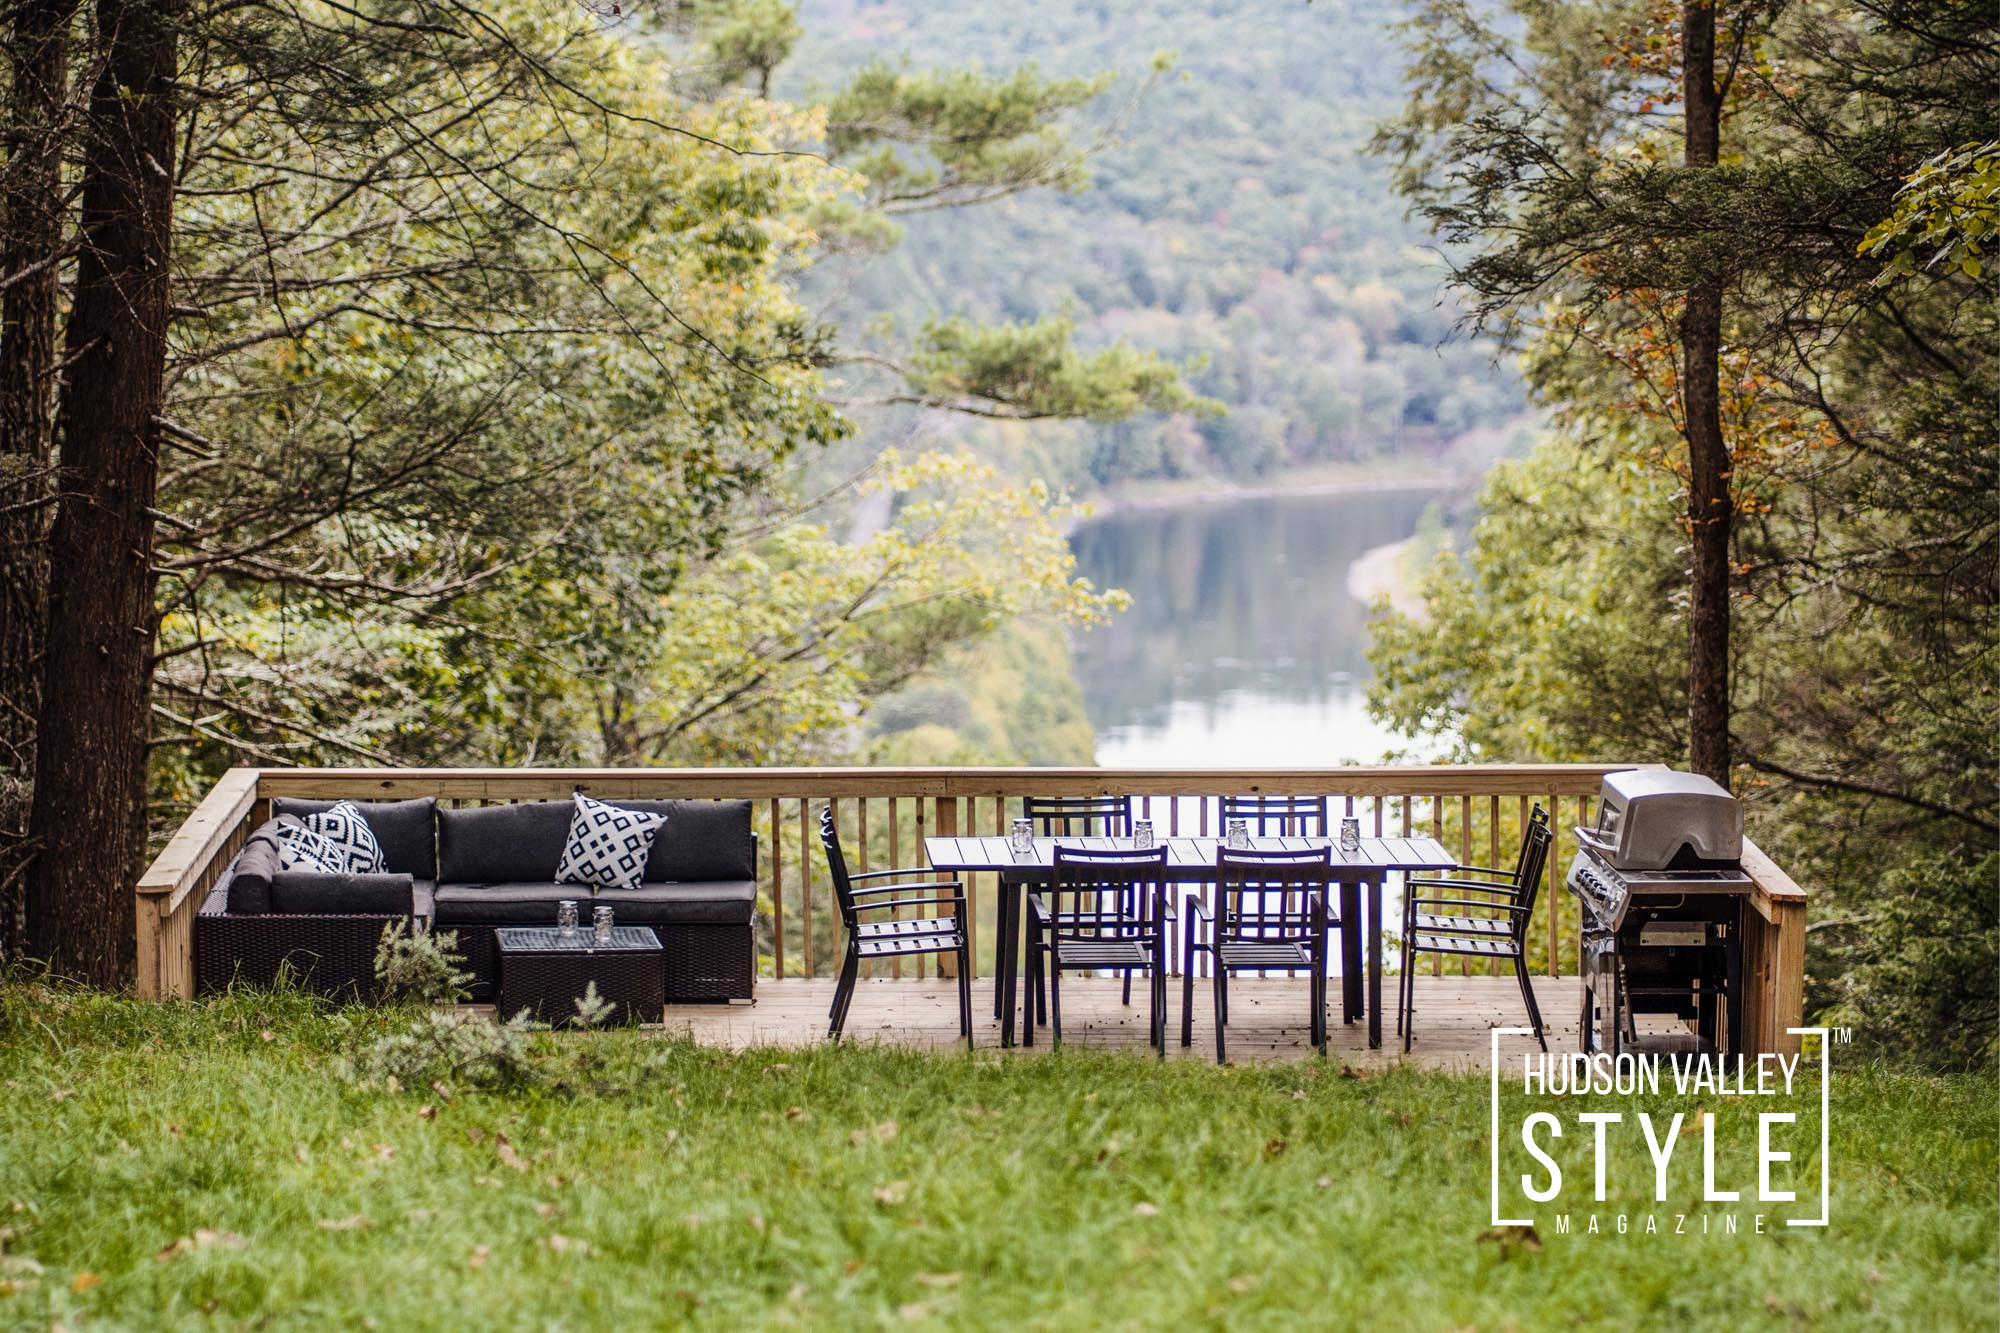 Getaway to the Catskills: Unwind at Rivers Ledge for Magnificent River Views – Airbnb Review by Photographer Maxwell Alexander for ALLUVION MEDIA